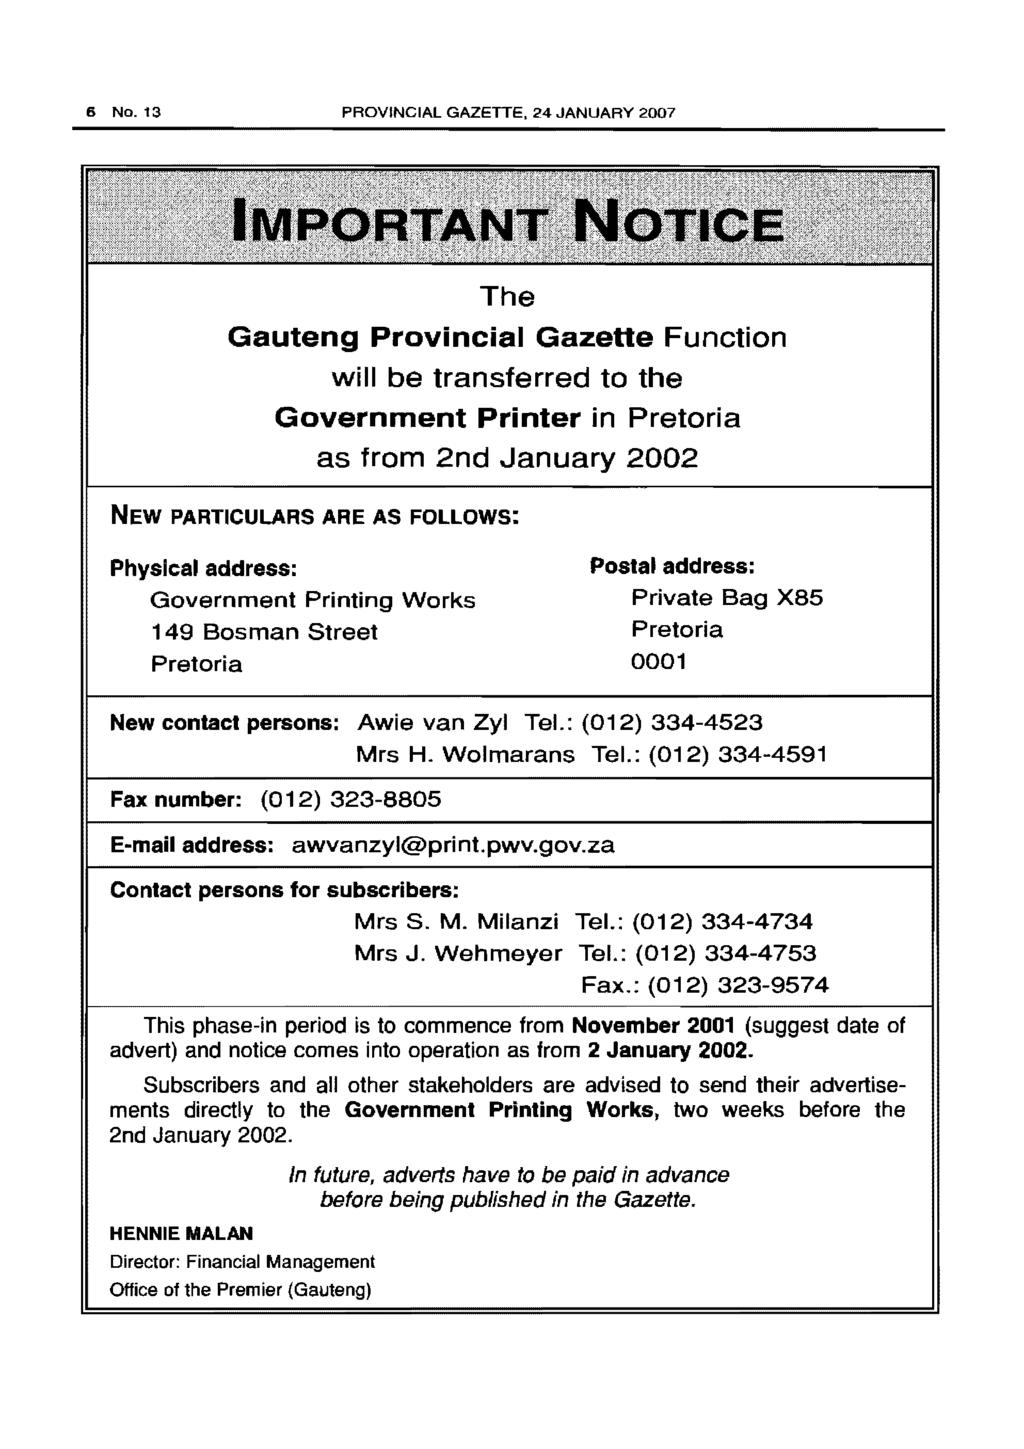 6 No. 13 PROVINCIAL GAZETTE, 24 JANUARY 2007 The Gauteng Provincial Gazette Function will be transferred to the Government Printer in Pretoria as from 2nd January 2002 NEW PARTICULARS ARE AS FOllOWS: